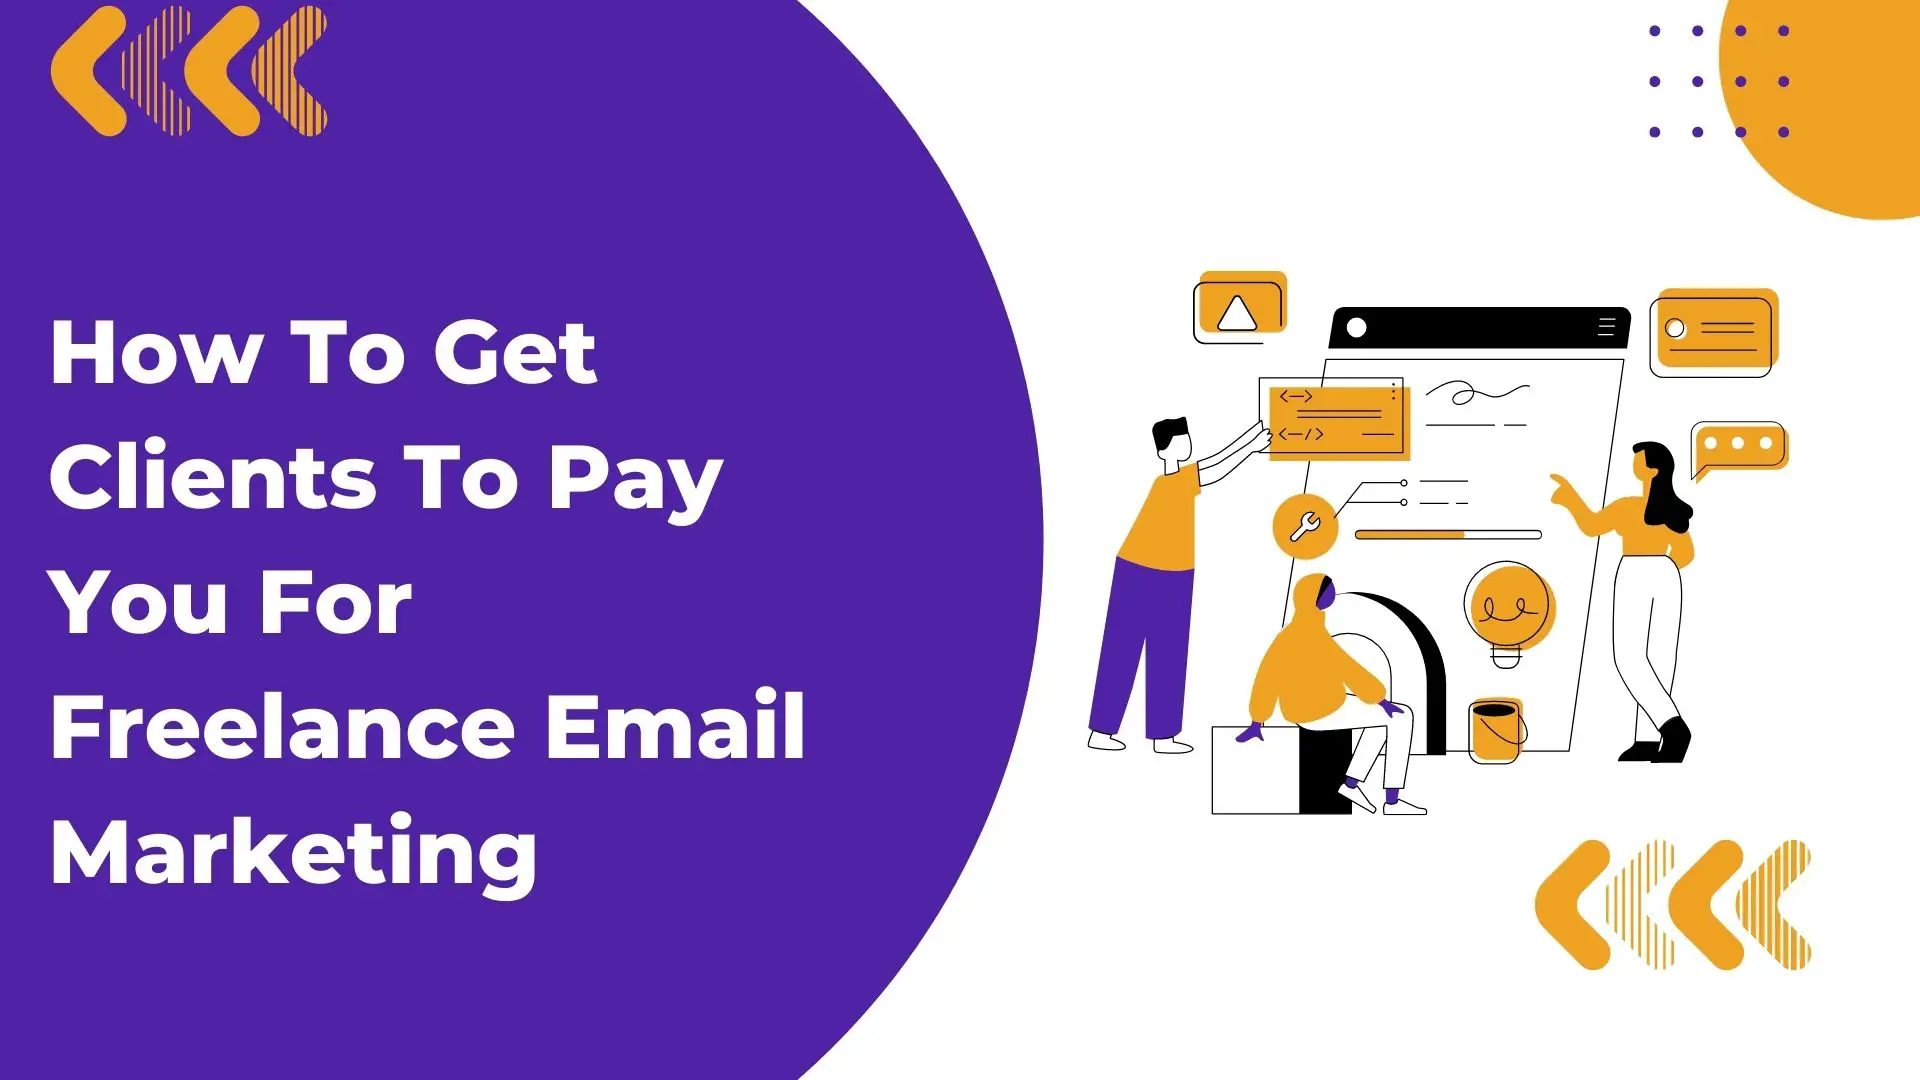 How To Get Clients To Pay You For Freelance Email Marketing